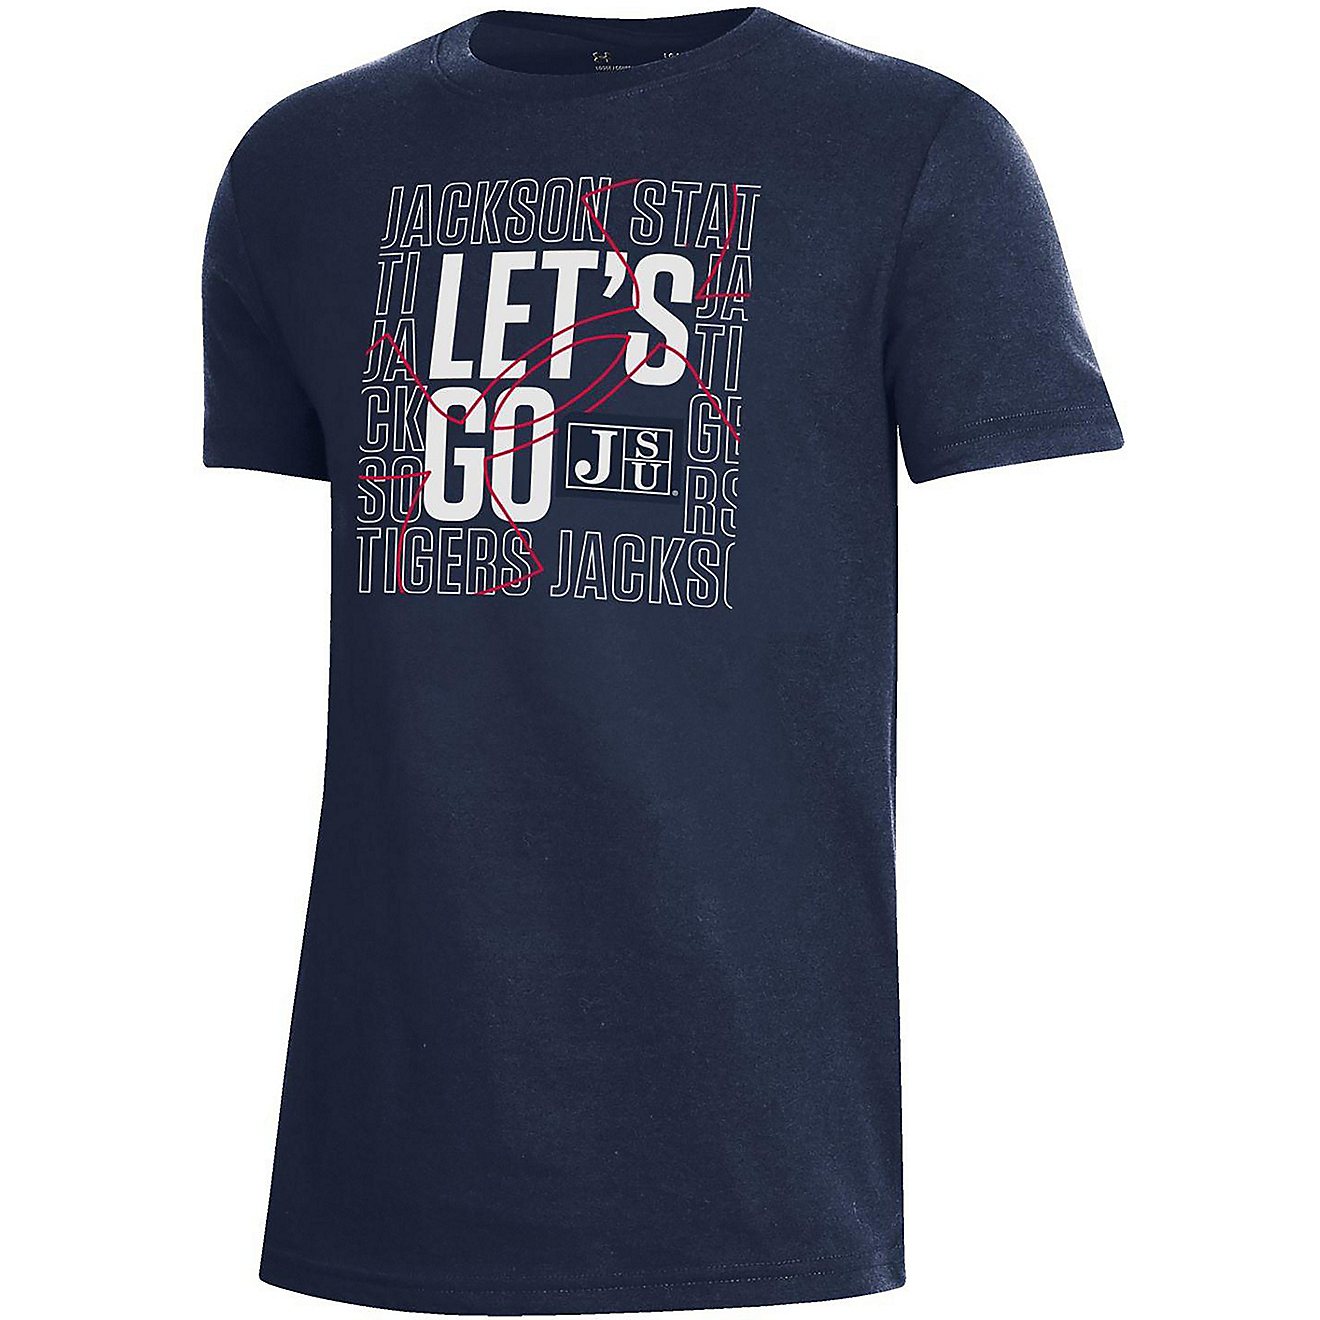 Under Armour Youth Jackson State University Let’s Go Performance T-shirt                                                       - view number 1